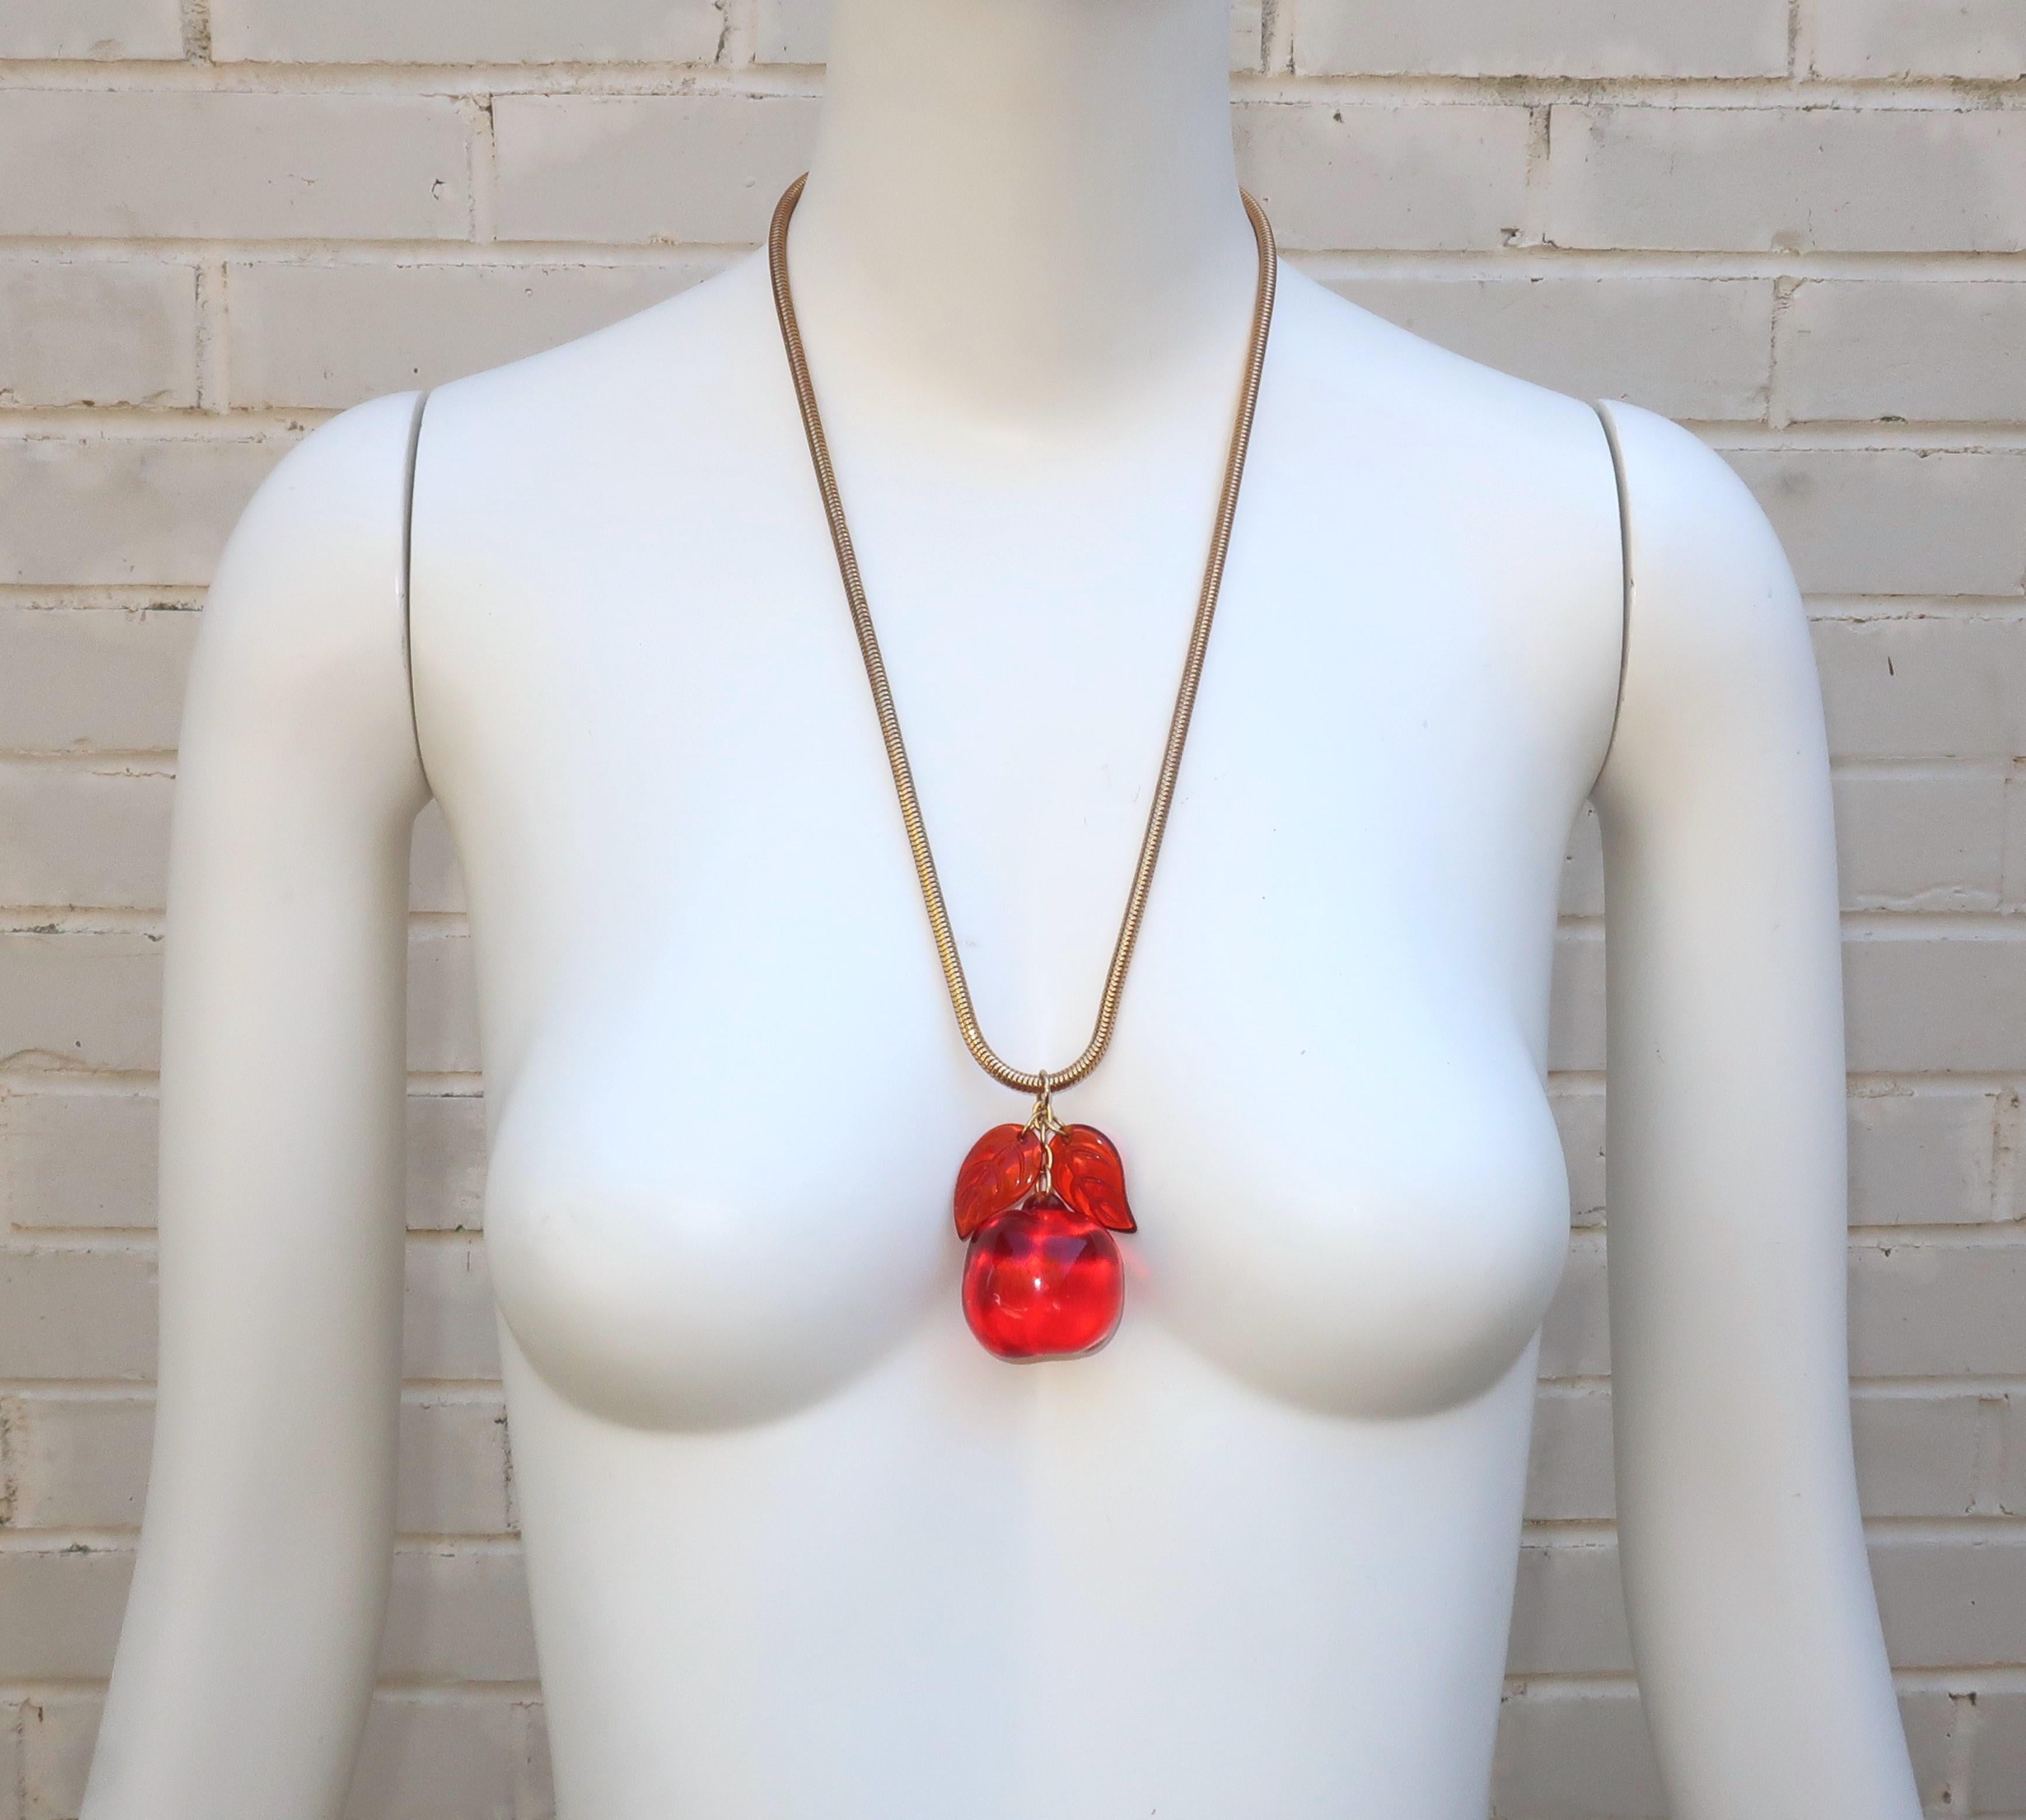 1970's lucite apple pendant necklace which retailed at Saks Fifth Avenue and may be a Les Bernard design.  This fun drop necklace has a pop art appeal with a heavy weight gold tone serpentine chain suspending a chunky lucite apple and articulated